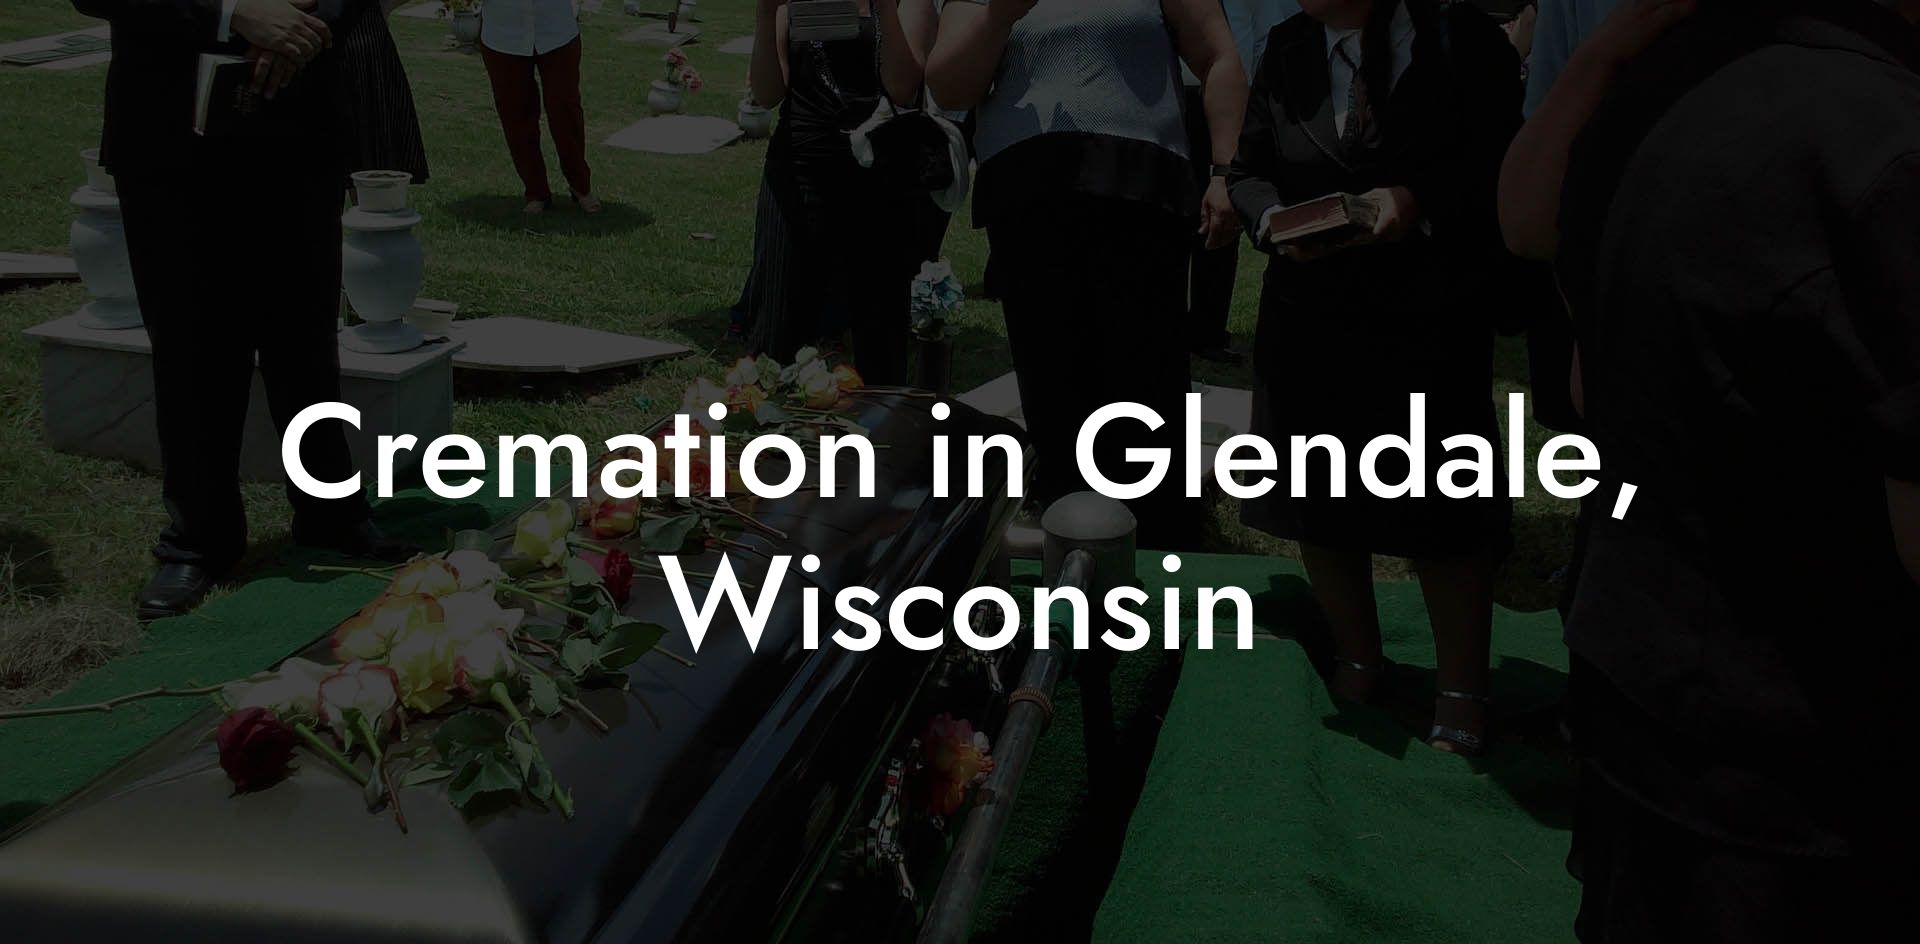 Cremation in Glendale, Wisconsin